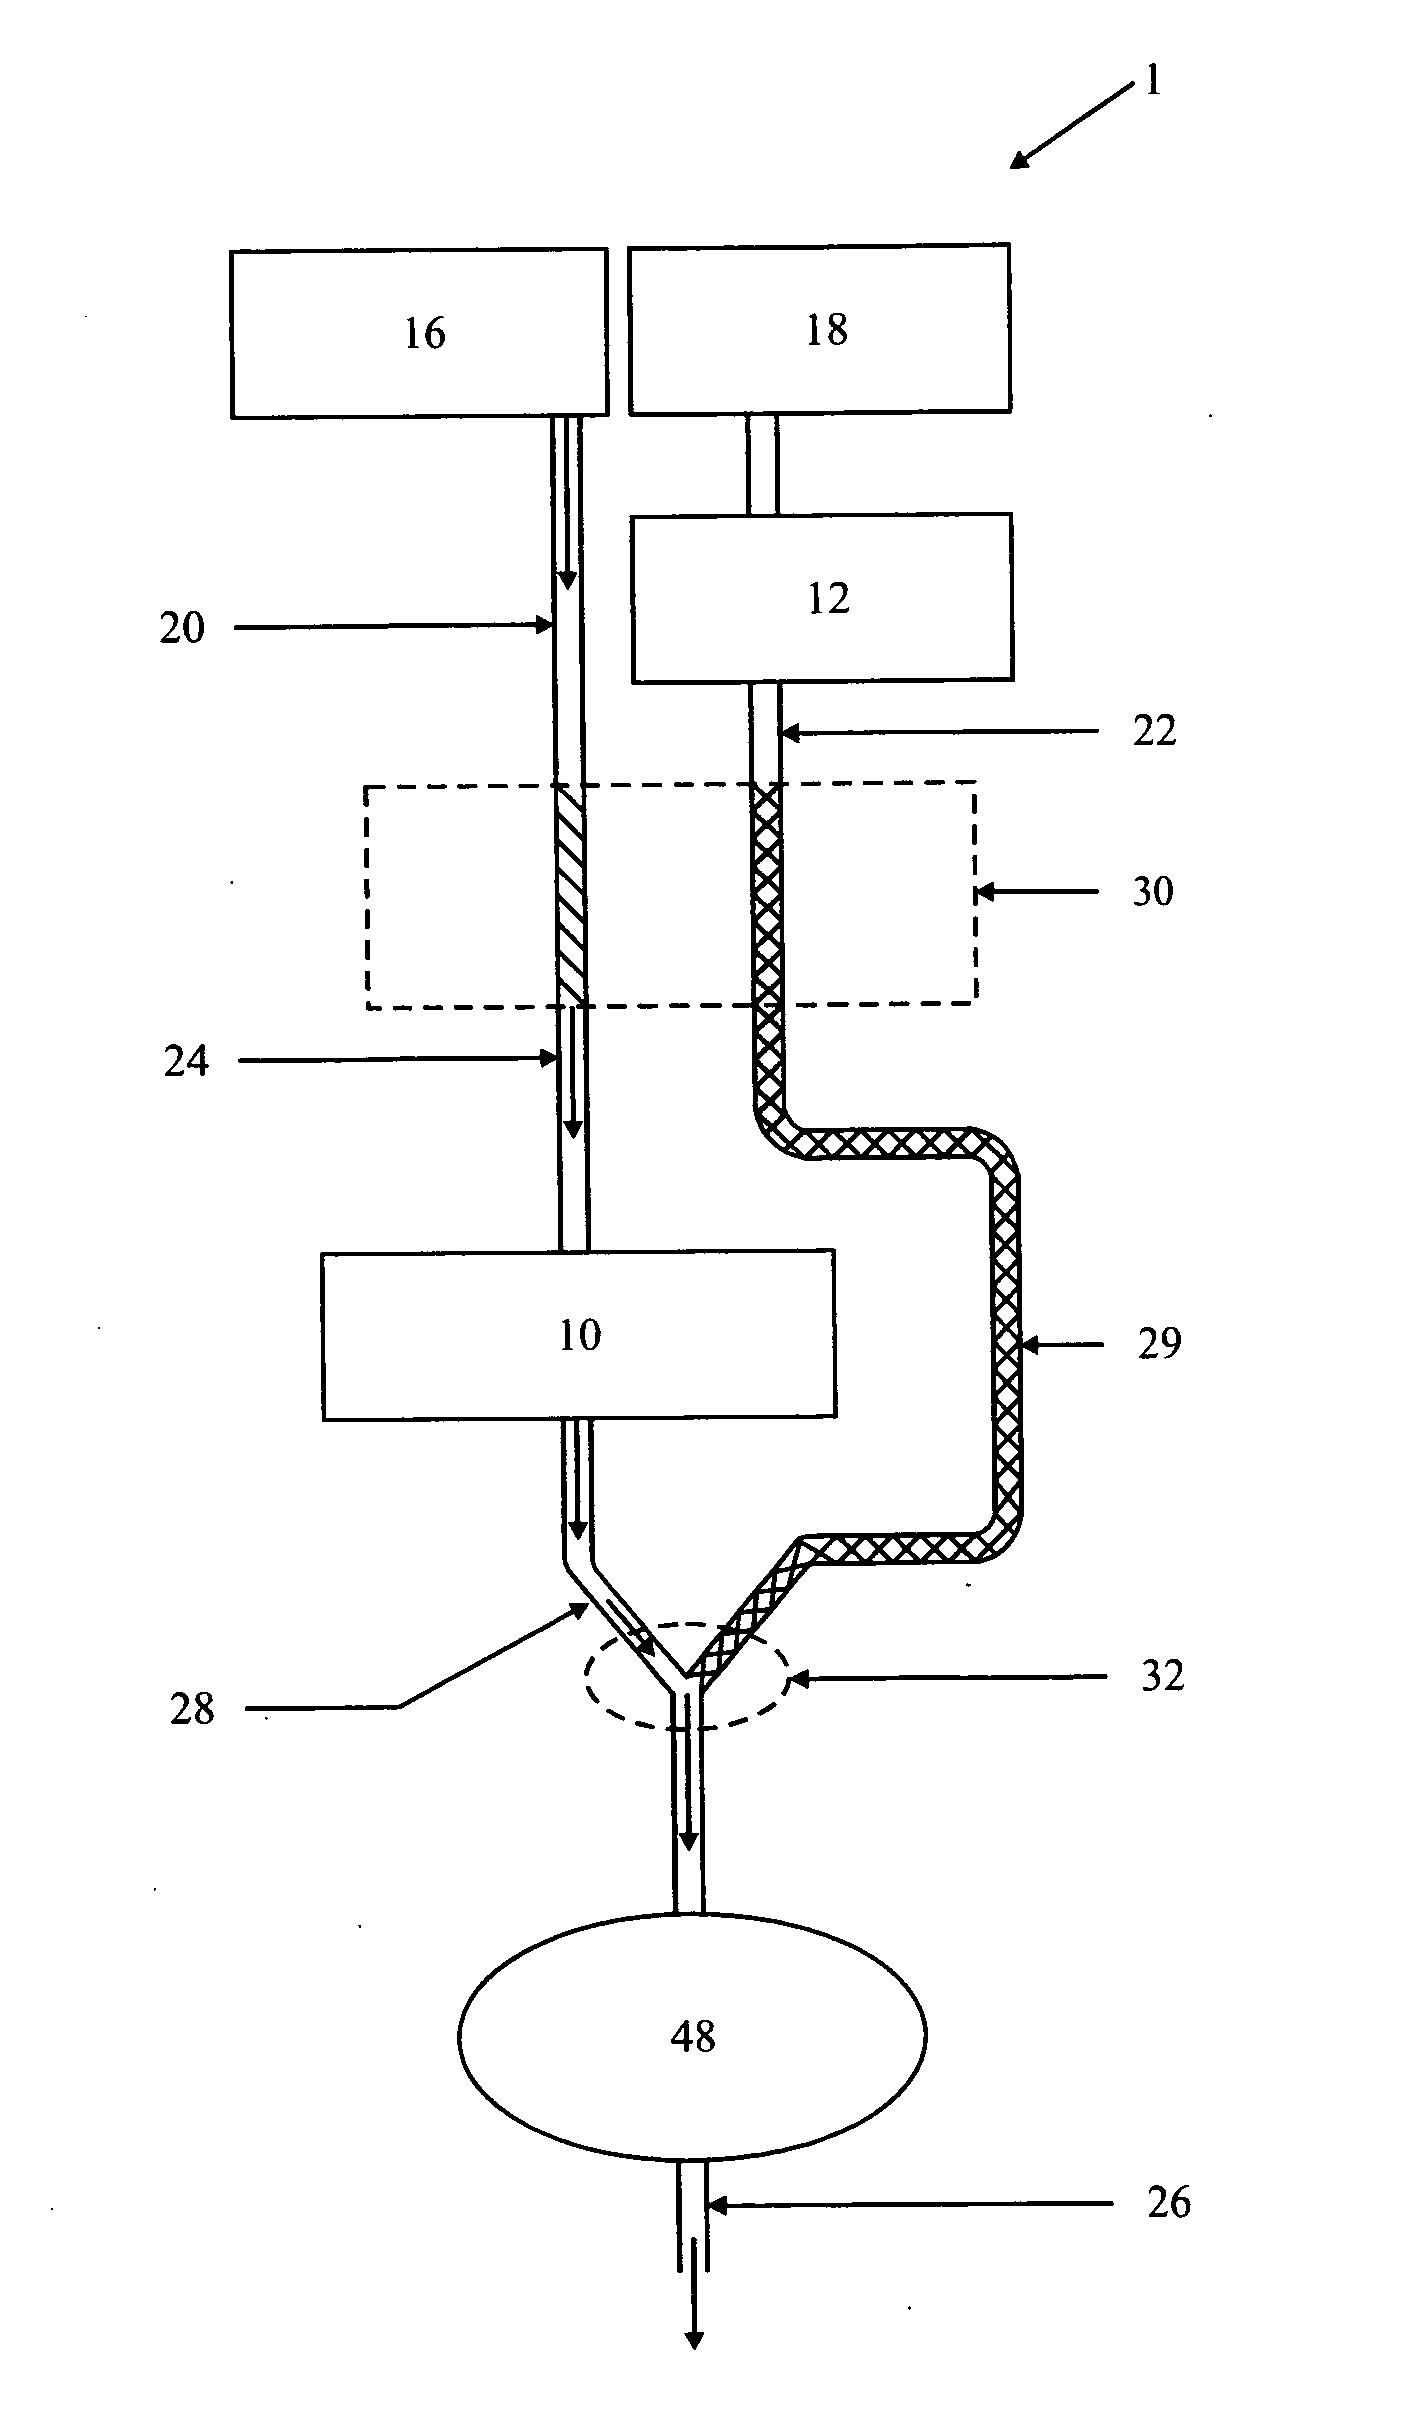 Auto-Cleaning And Auto-Zeroing System Used With A Photo-Ionization Detector